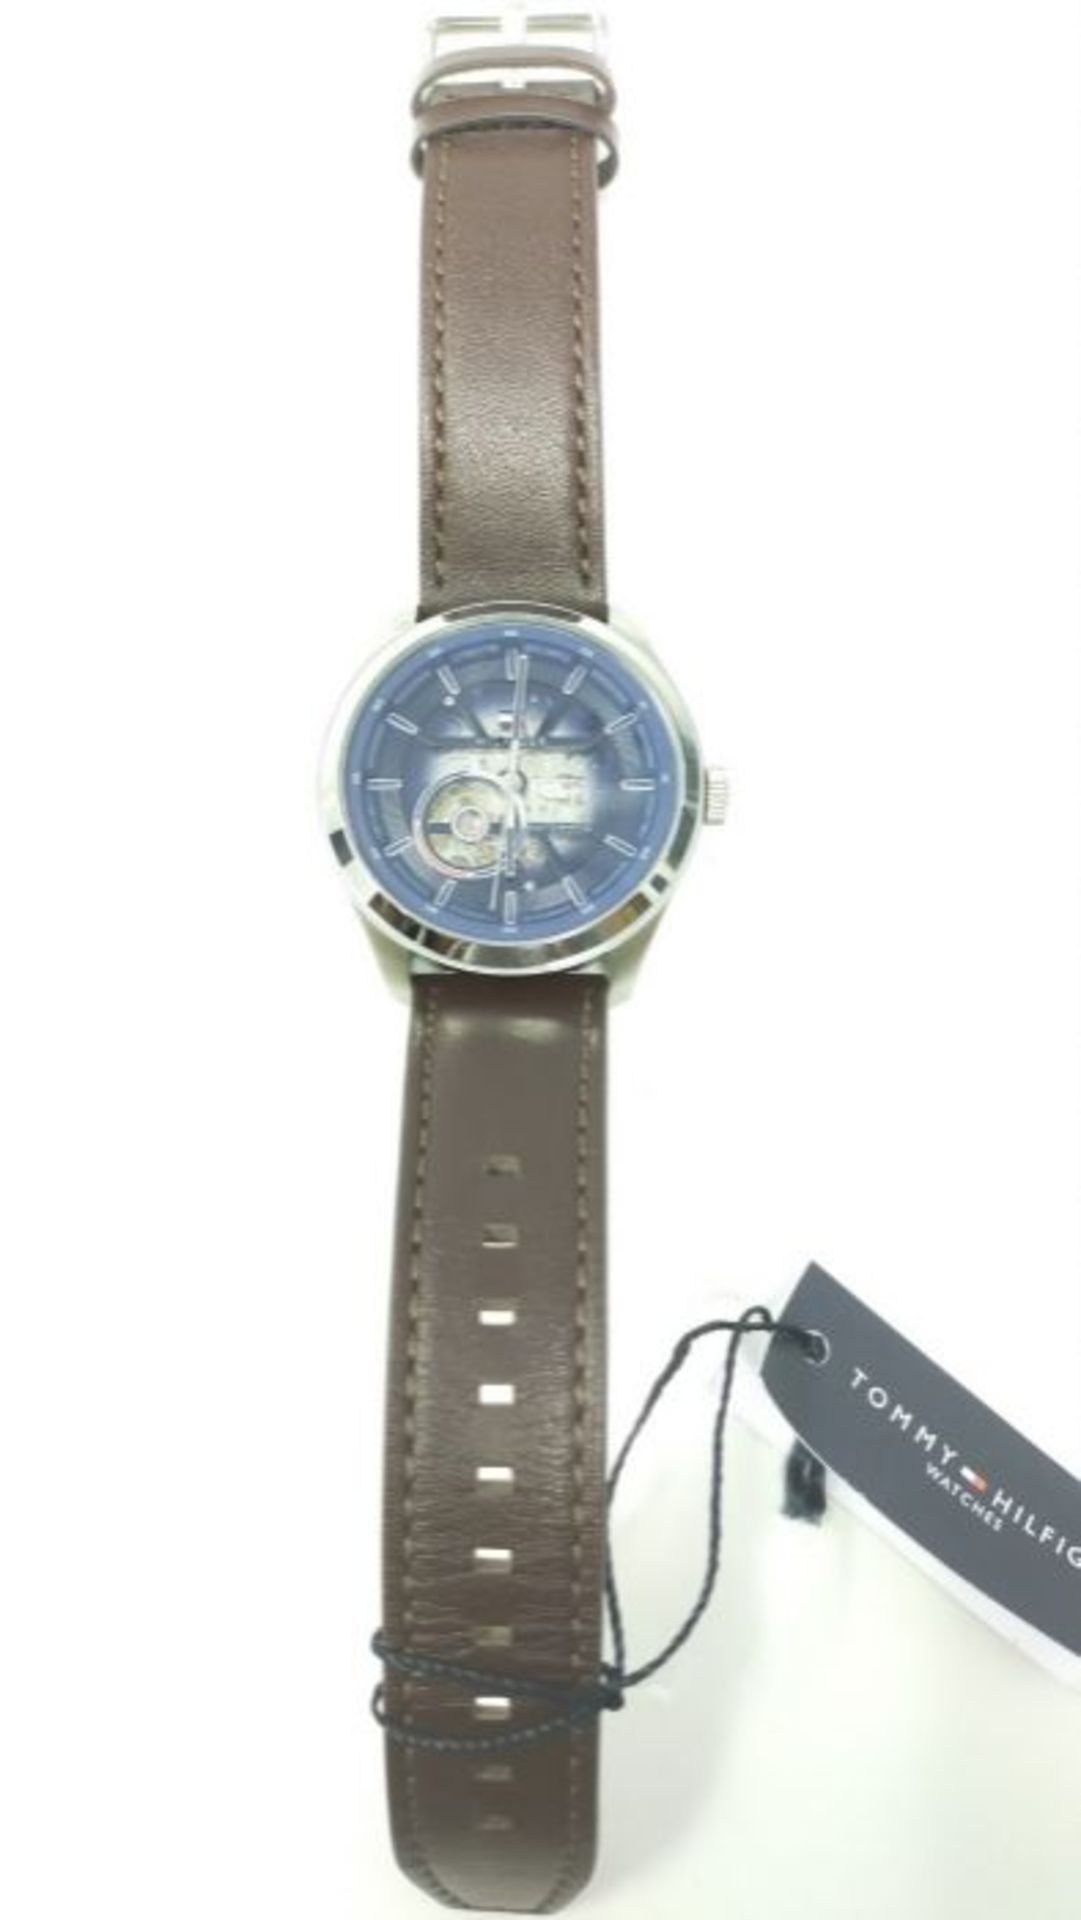 RRP £136.00 Tommy Hilfiger Men's Analog Quartz Watch with Leather Strap 1791888 - Image 3 of 3